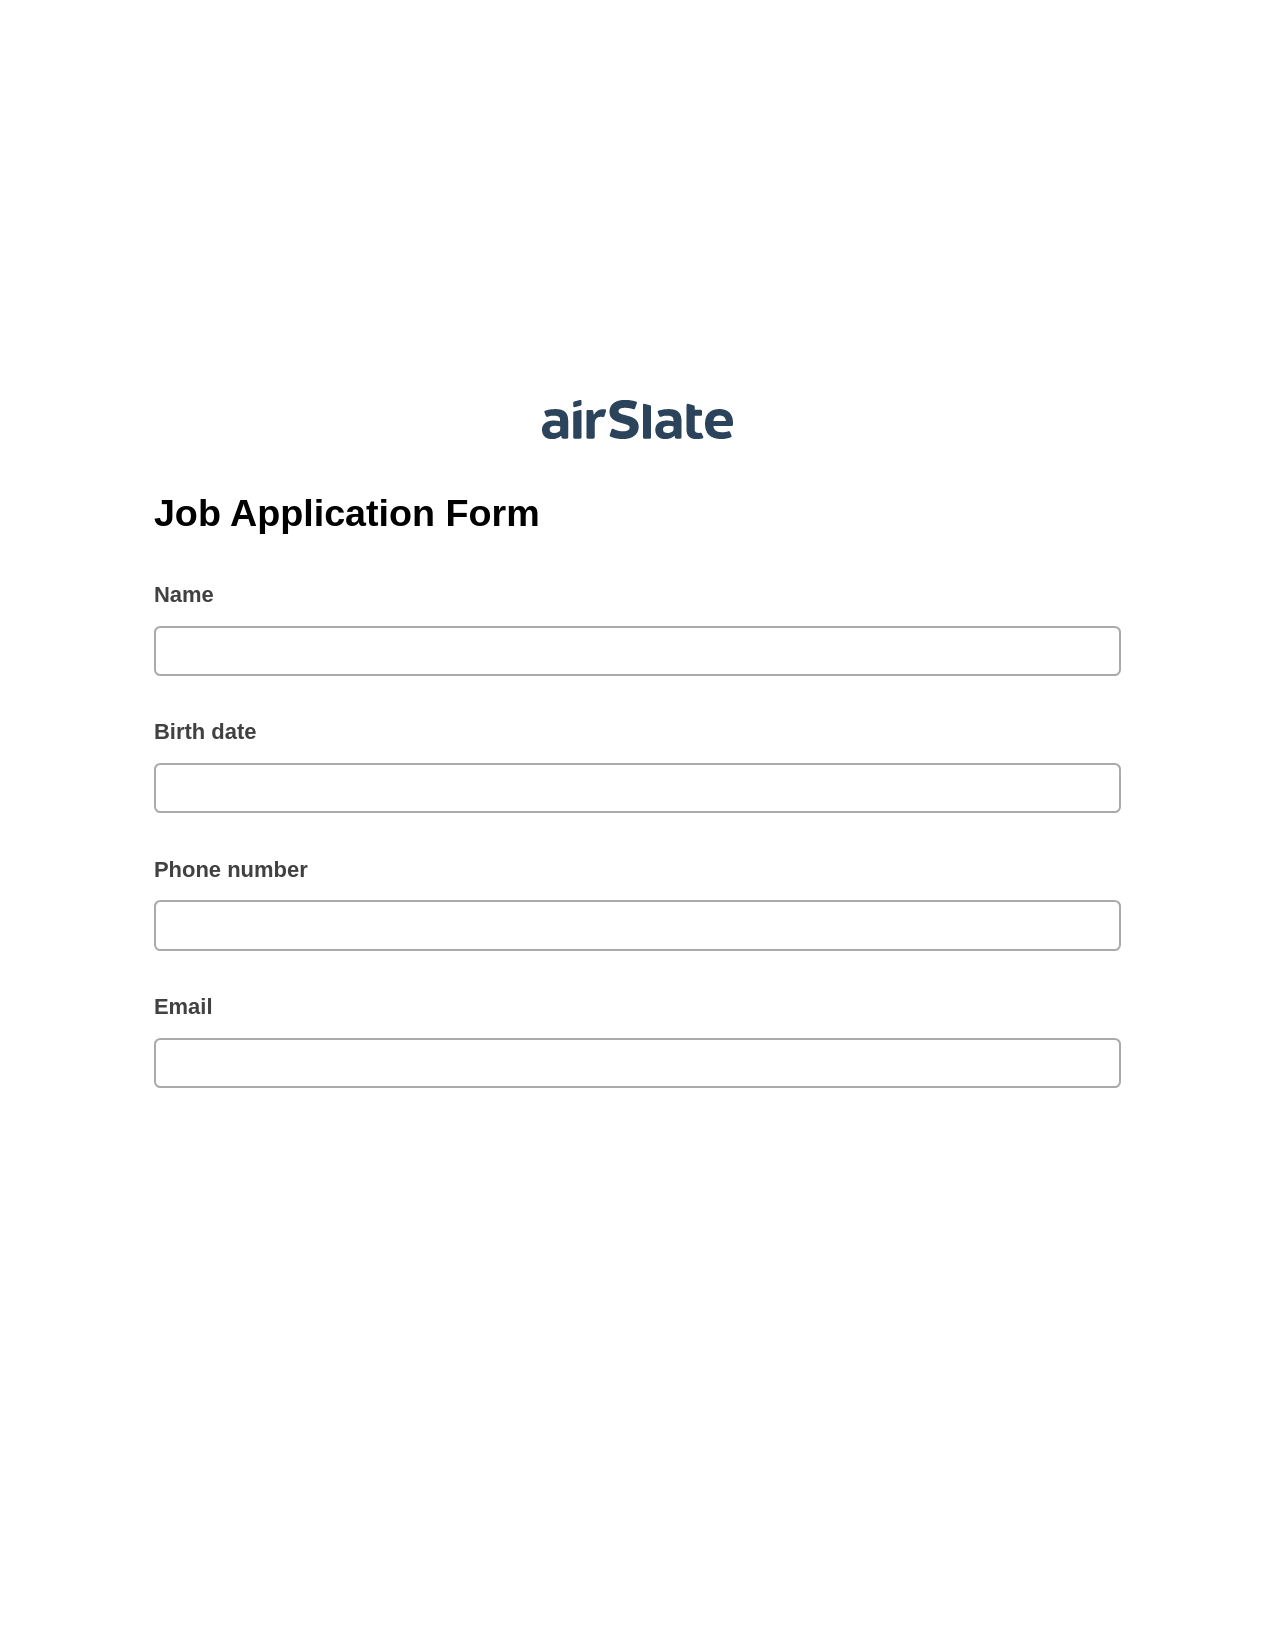 Multirole Job Application Form Pre-fill from Excel Spreadsheet Dropdown Options Bot, Slack Notification Bot, Export to Salesforce Bot